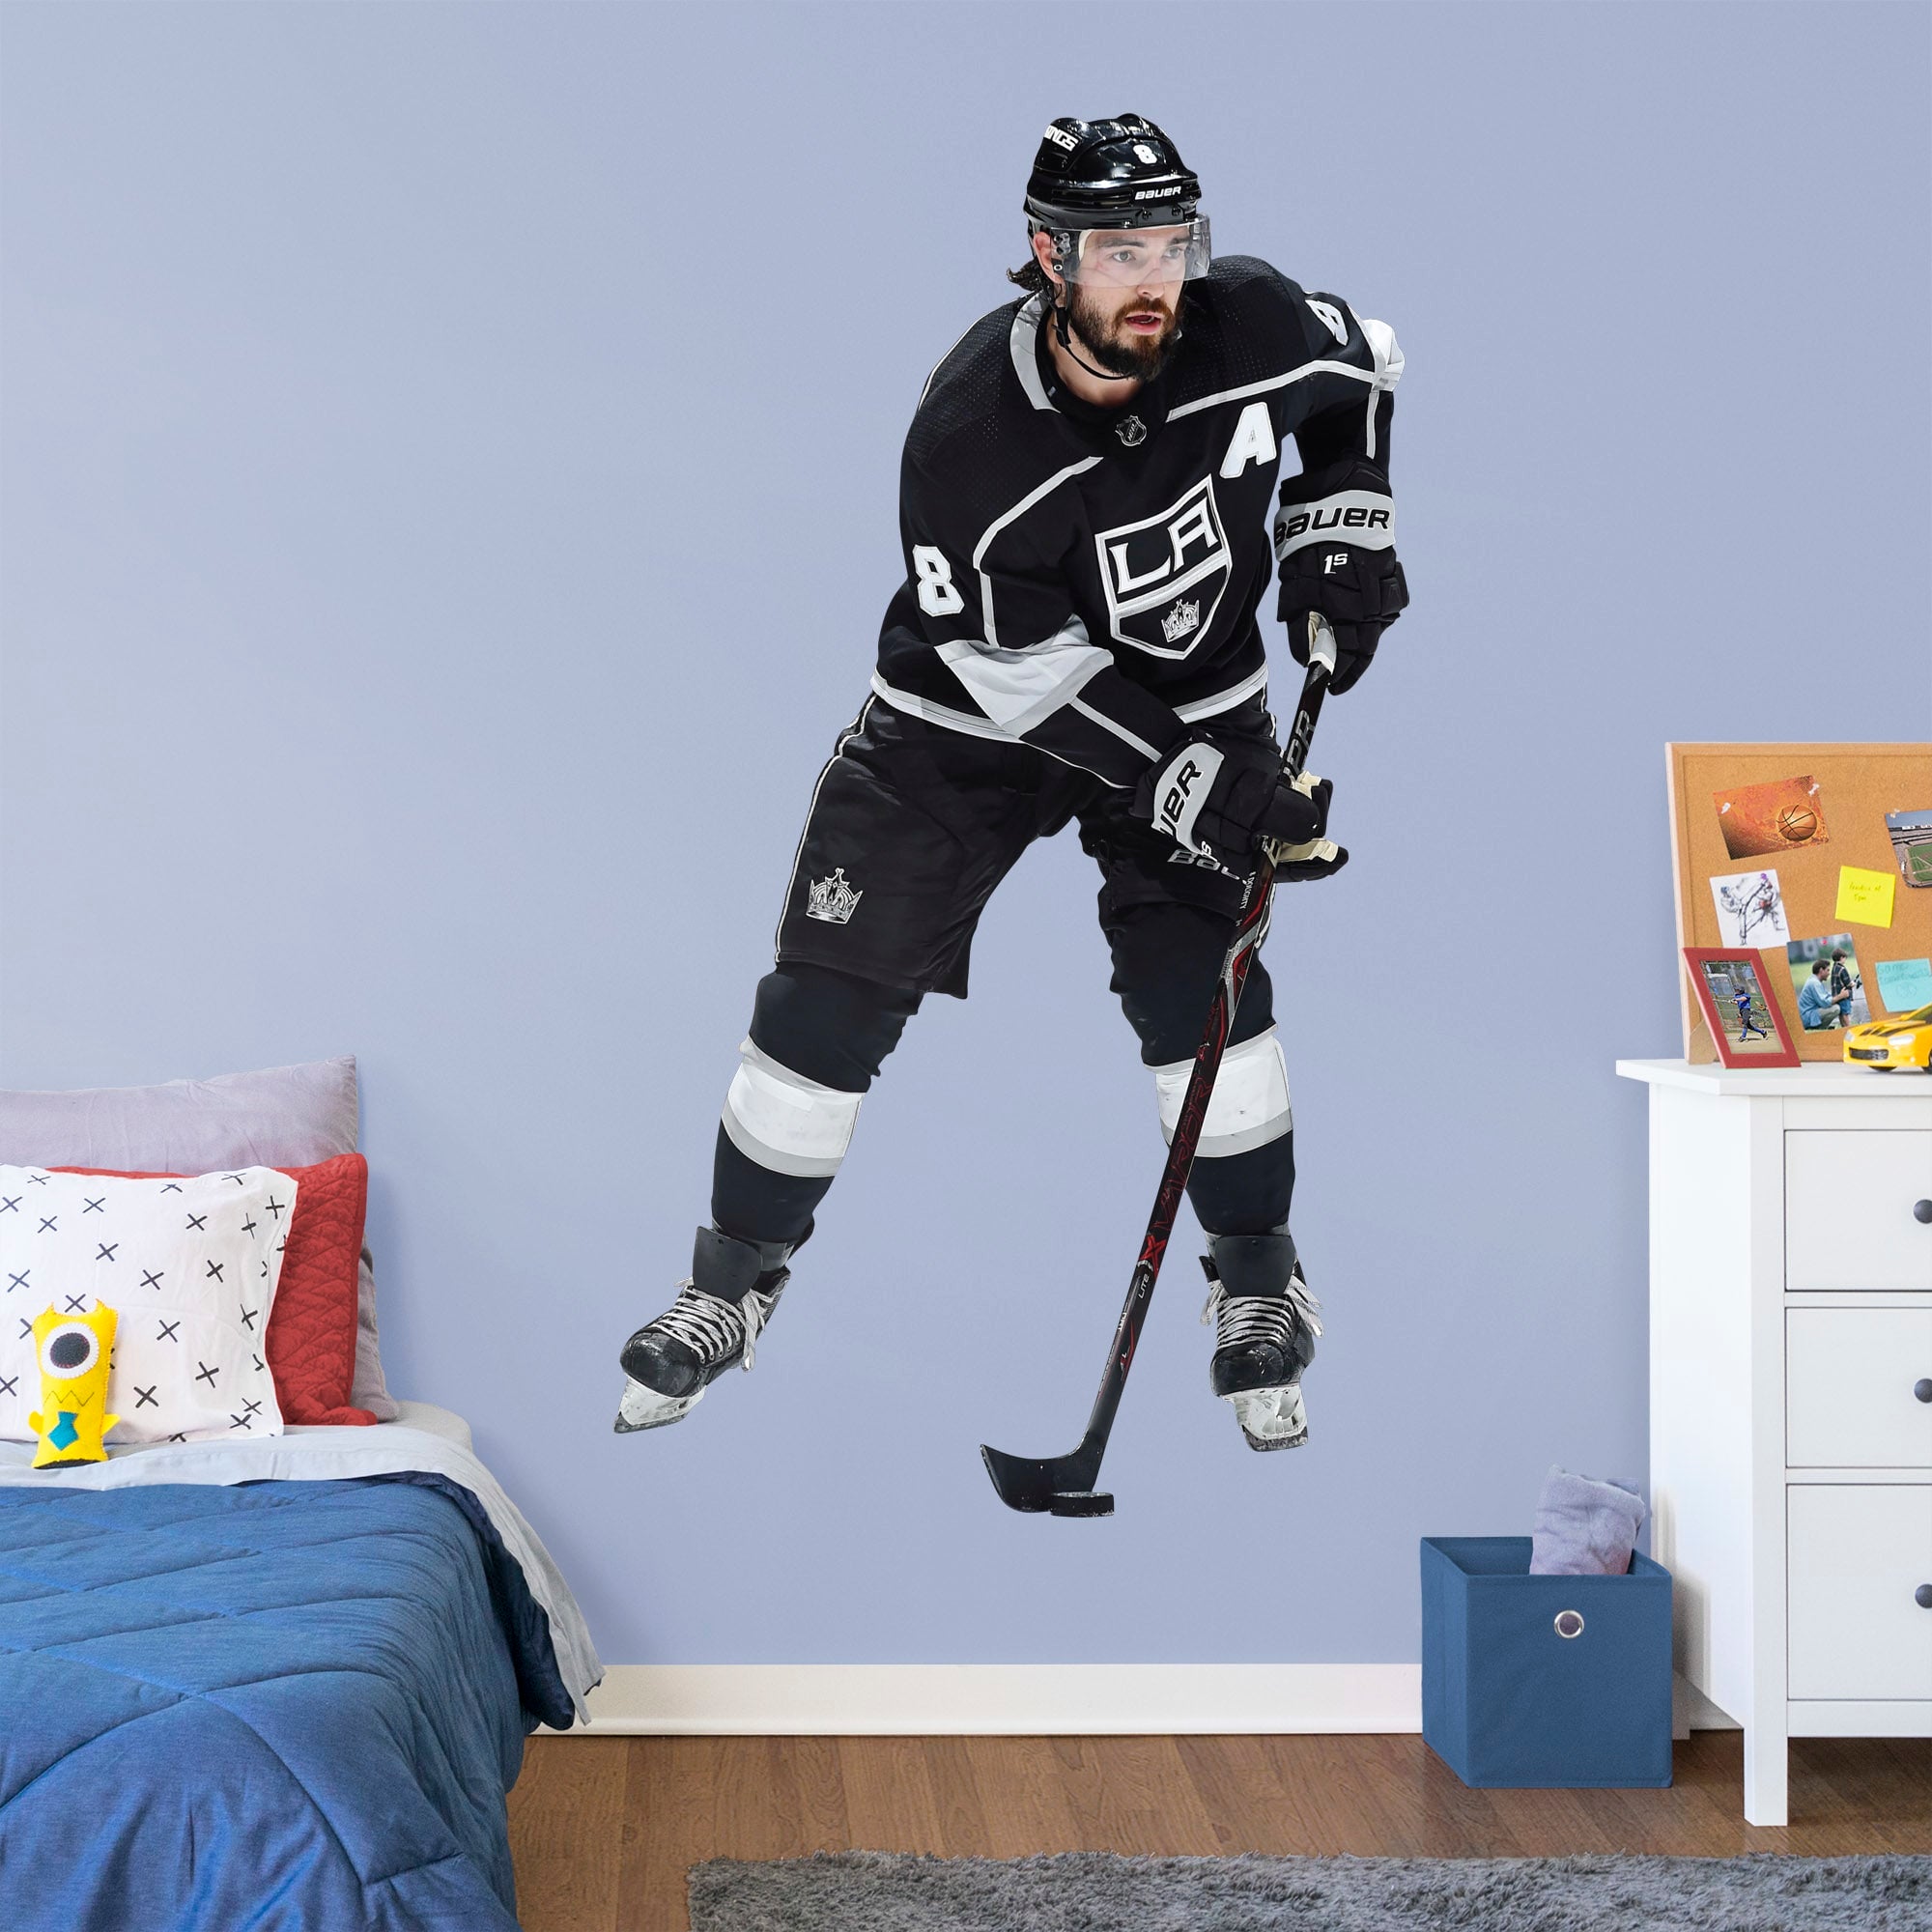 Drew Doughty for Los Angeles Kings - Officially Licensed NHL Removable Wall Decal Life-Size Athlete + 2 Decals (44"W x 77"H) by